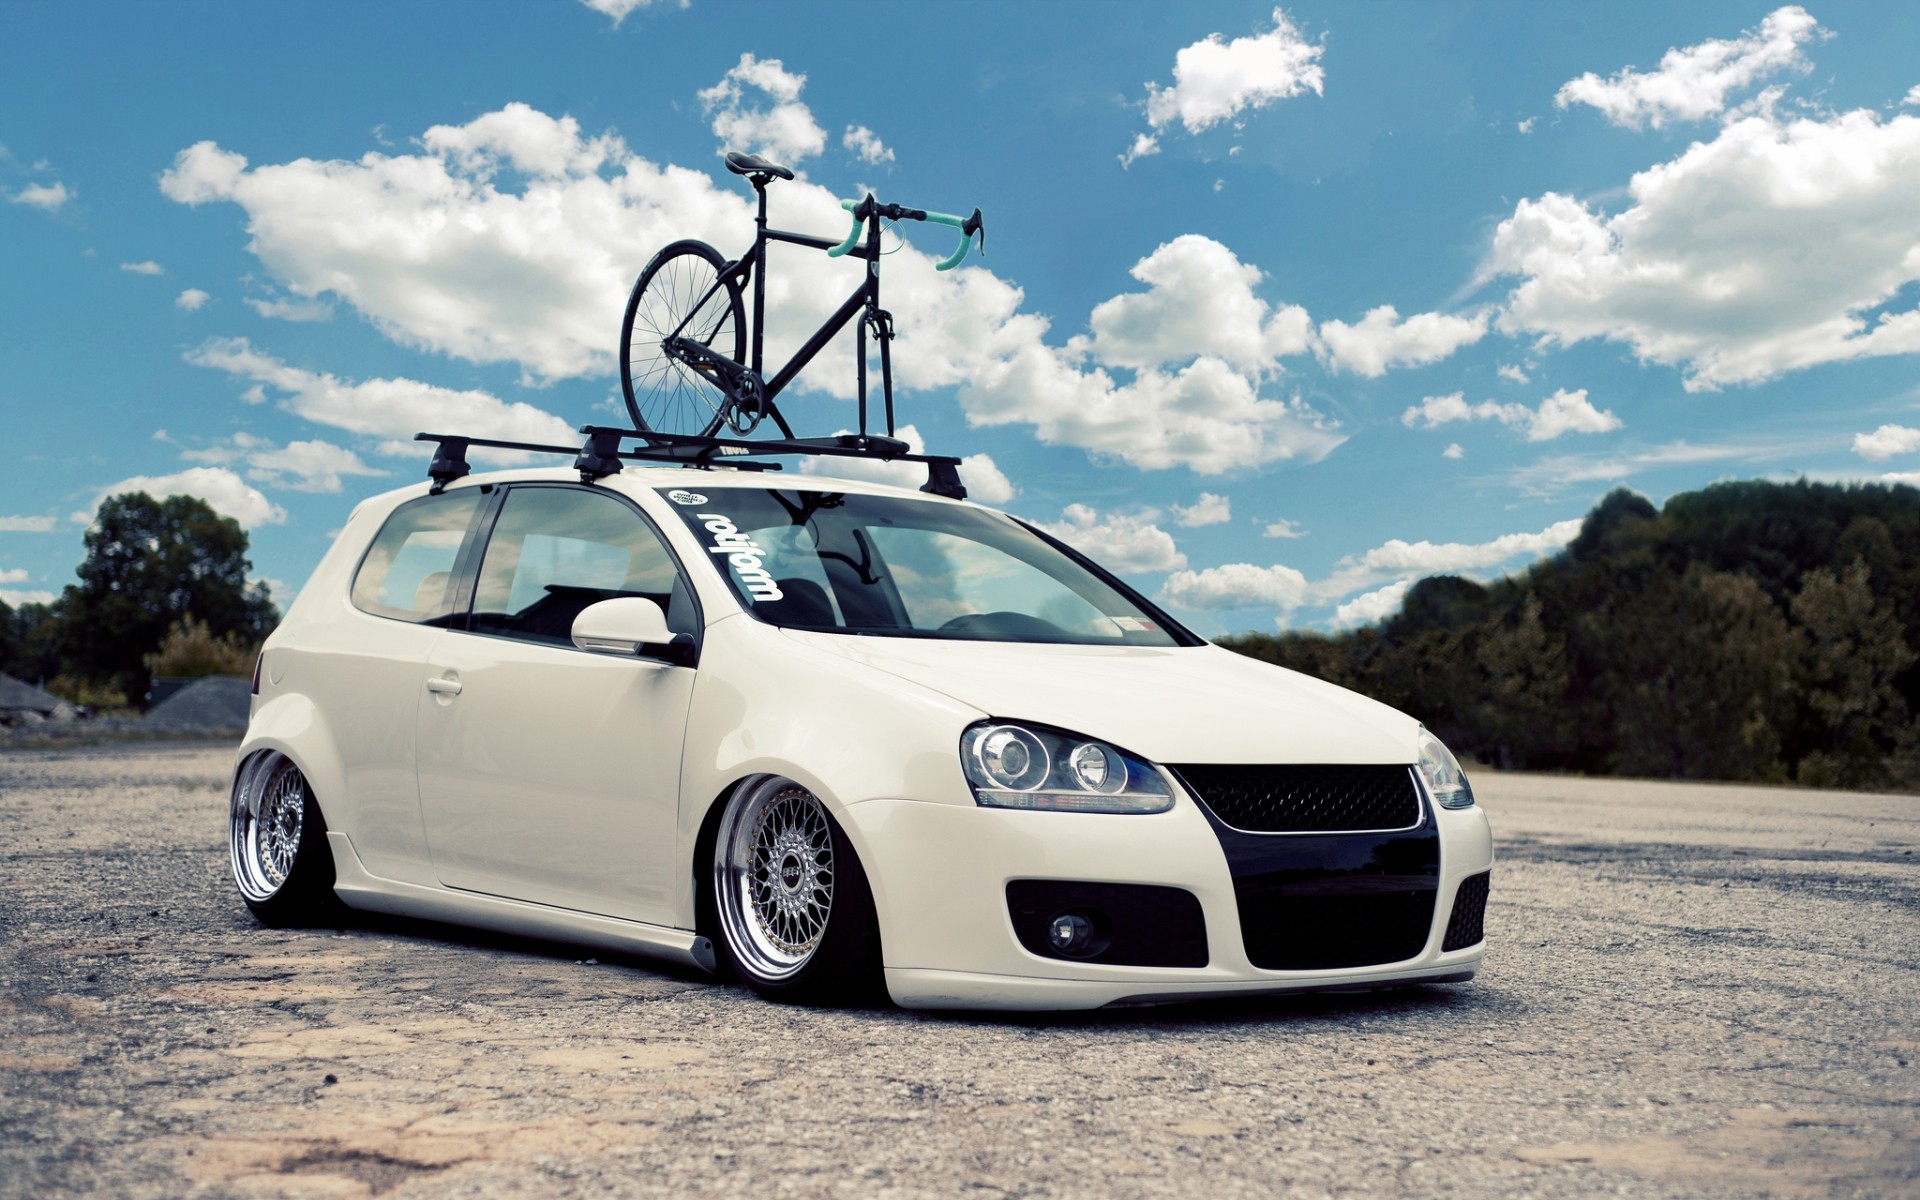 General 1920x1200 car vehicle white cars Volkswagen Volkswagen Golf German cars hatchbacks Volkswagen Group